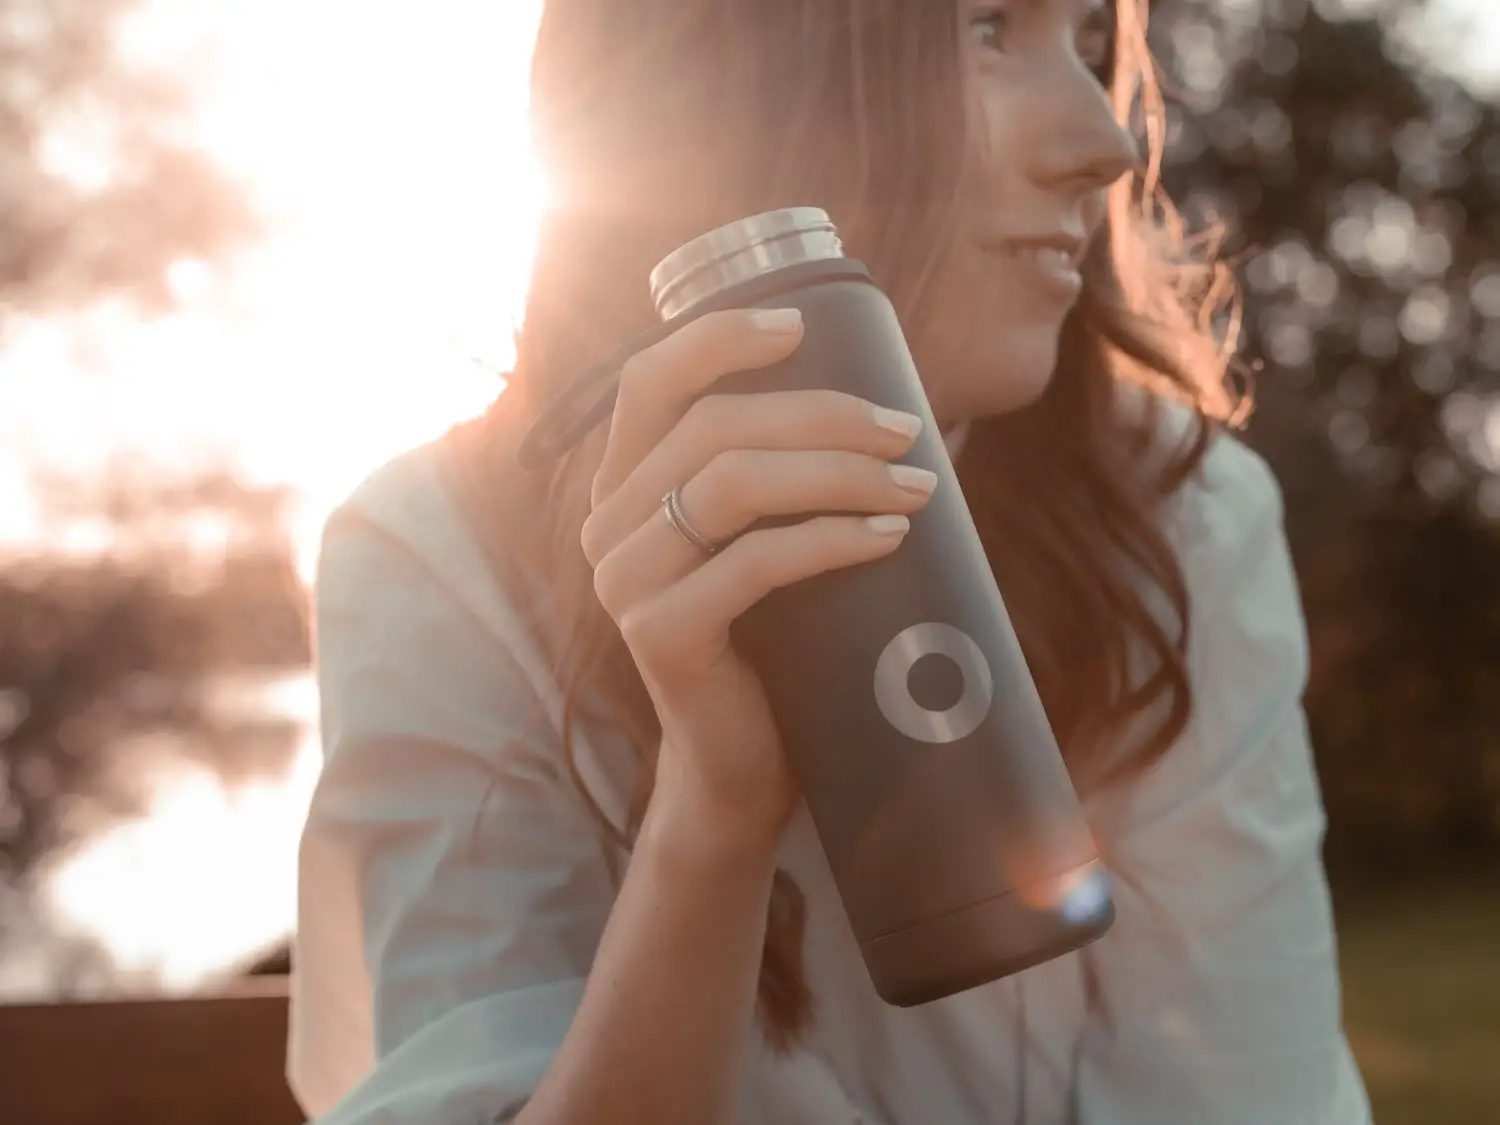 How to Keep Water Hot for Longer in a Thermos